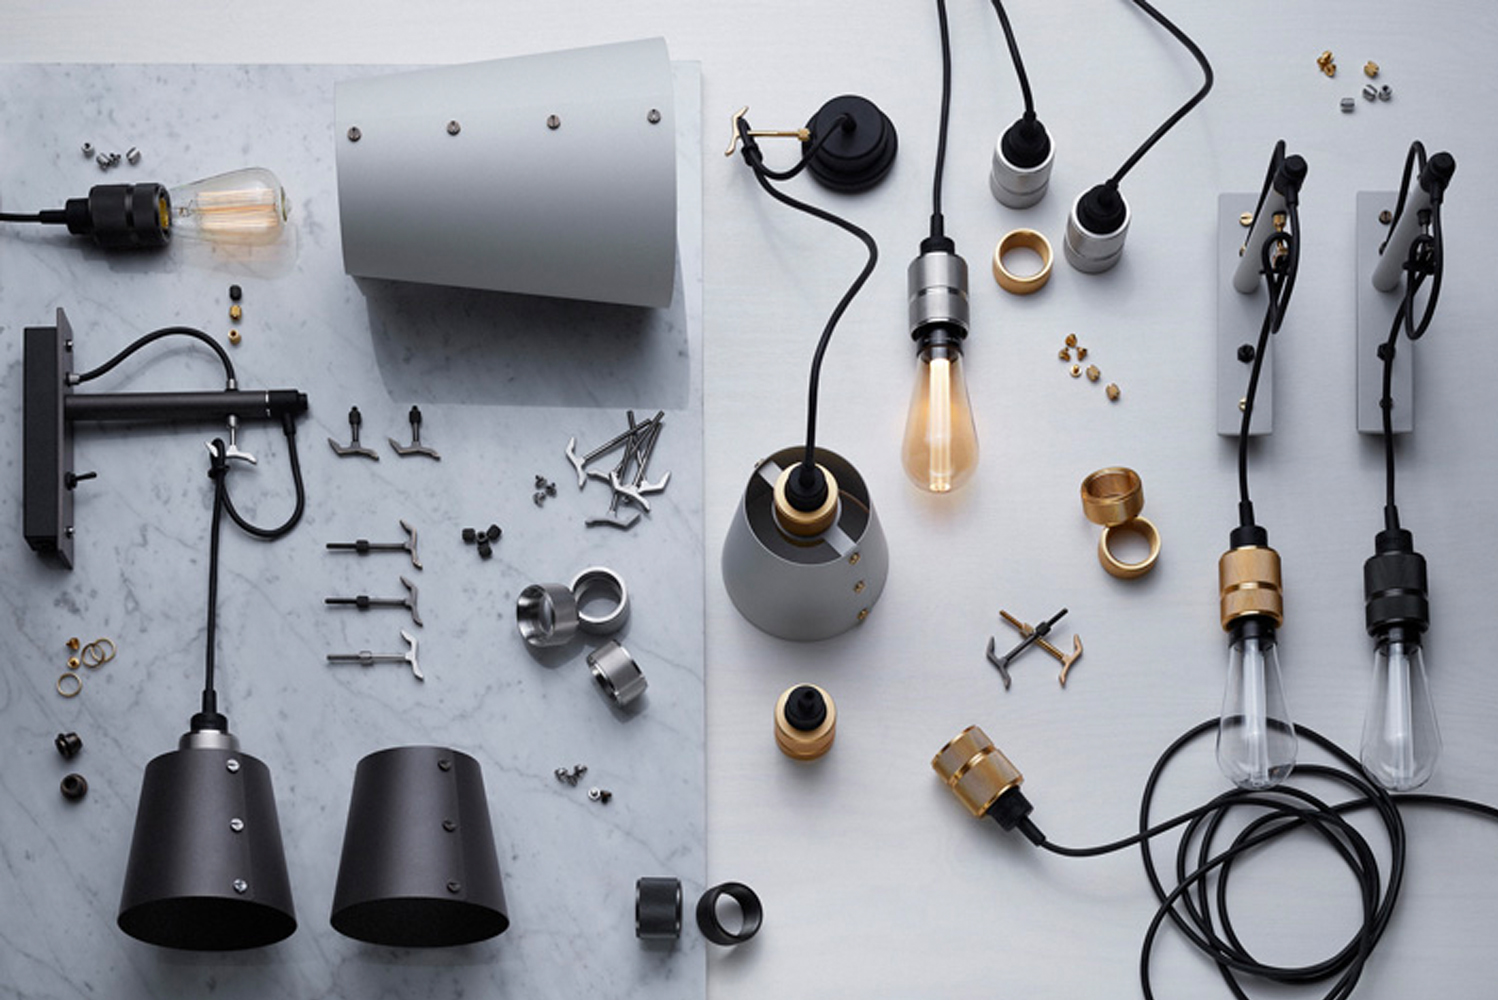 Introducing home fashion label Buster  Punchs fully customizable Hooked lighting collection which features various confi